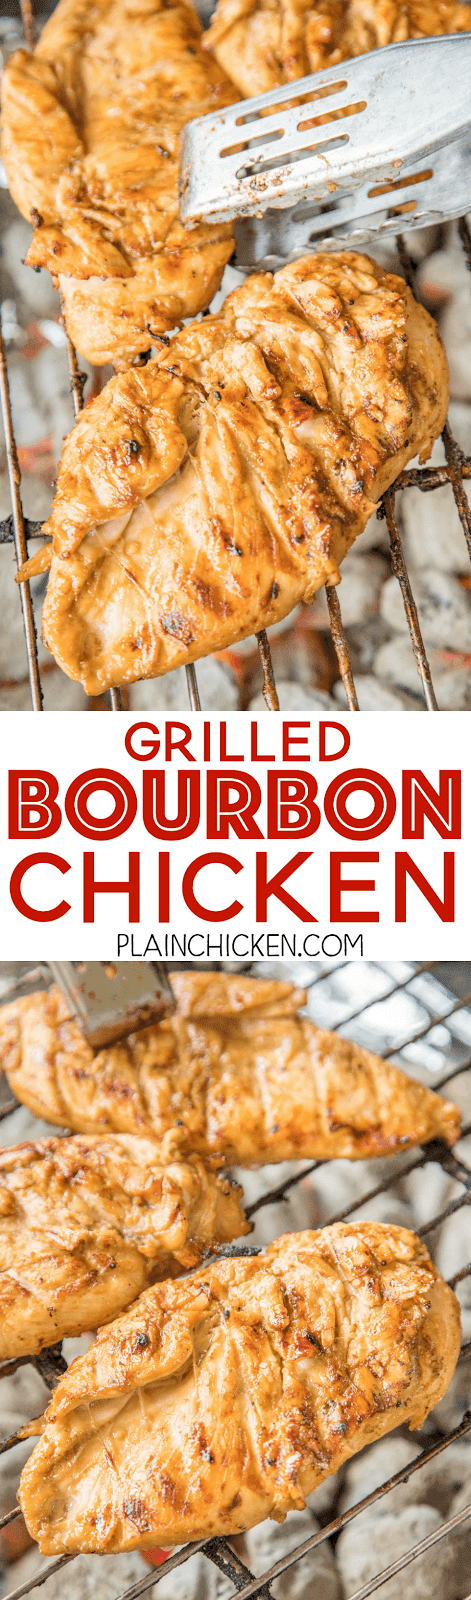 Grilled Bourbon Chicken - seriously delicious!!! Let the chicken marinate a few hours or overnight for maximum flavor. We ate this chicken two days in a row!! Can't wait to make it again this weekend!!! SO tender, juicy and packed full of AMAZING flavor!! Chicken, dijon mustard, red wine vinegar, Worcestershire, bourbon, brown sugar, garlic. THE BEST grilled chicken breast recipe!